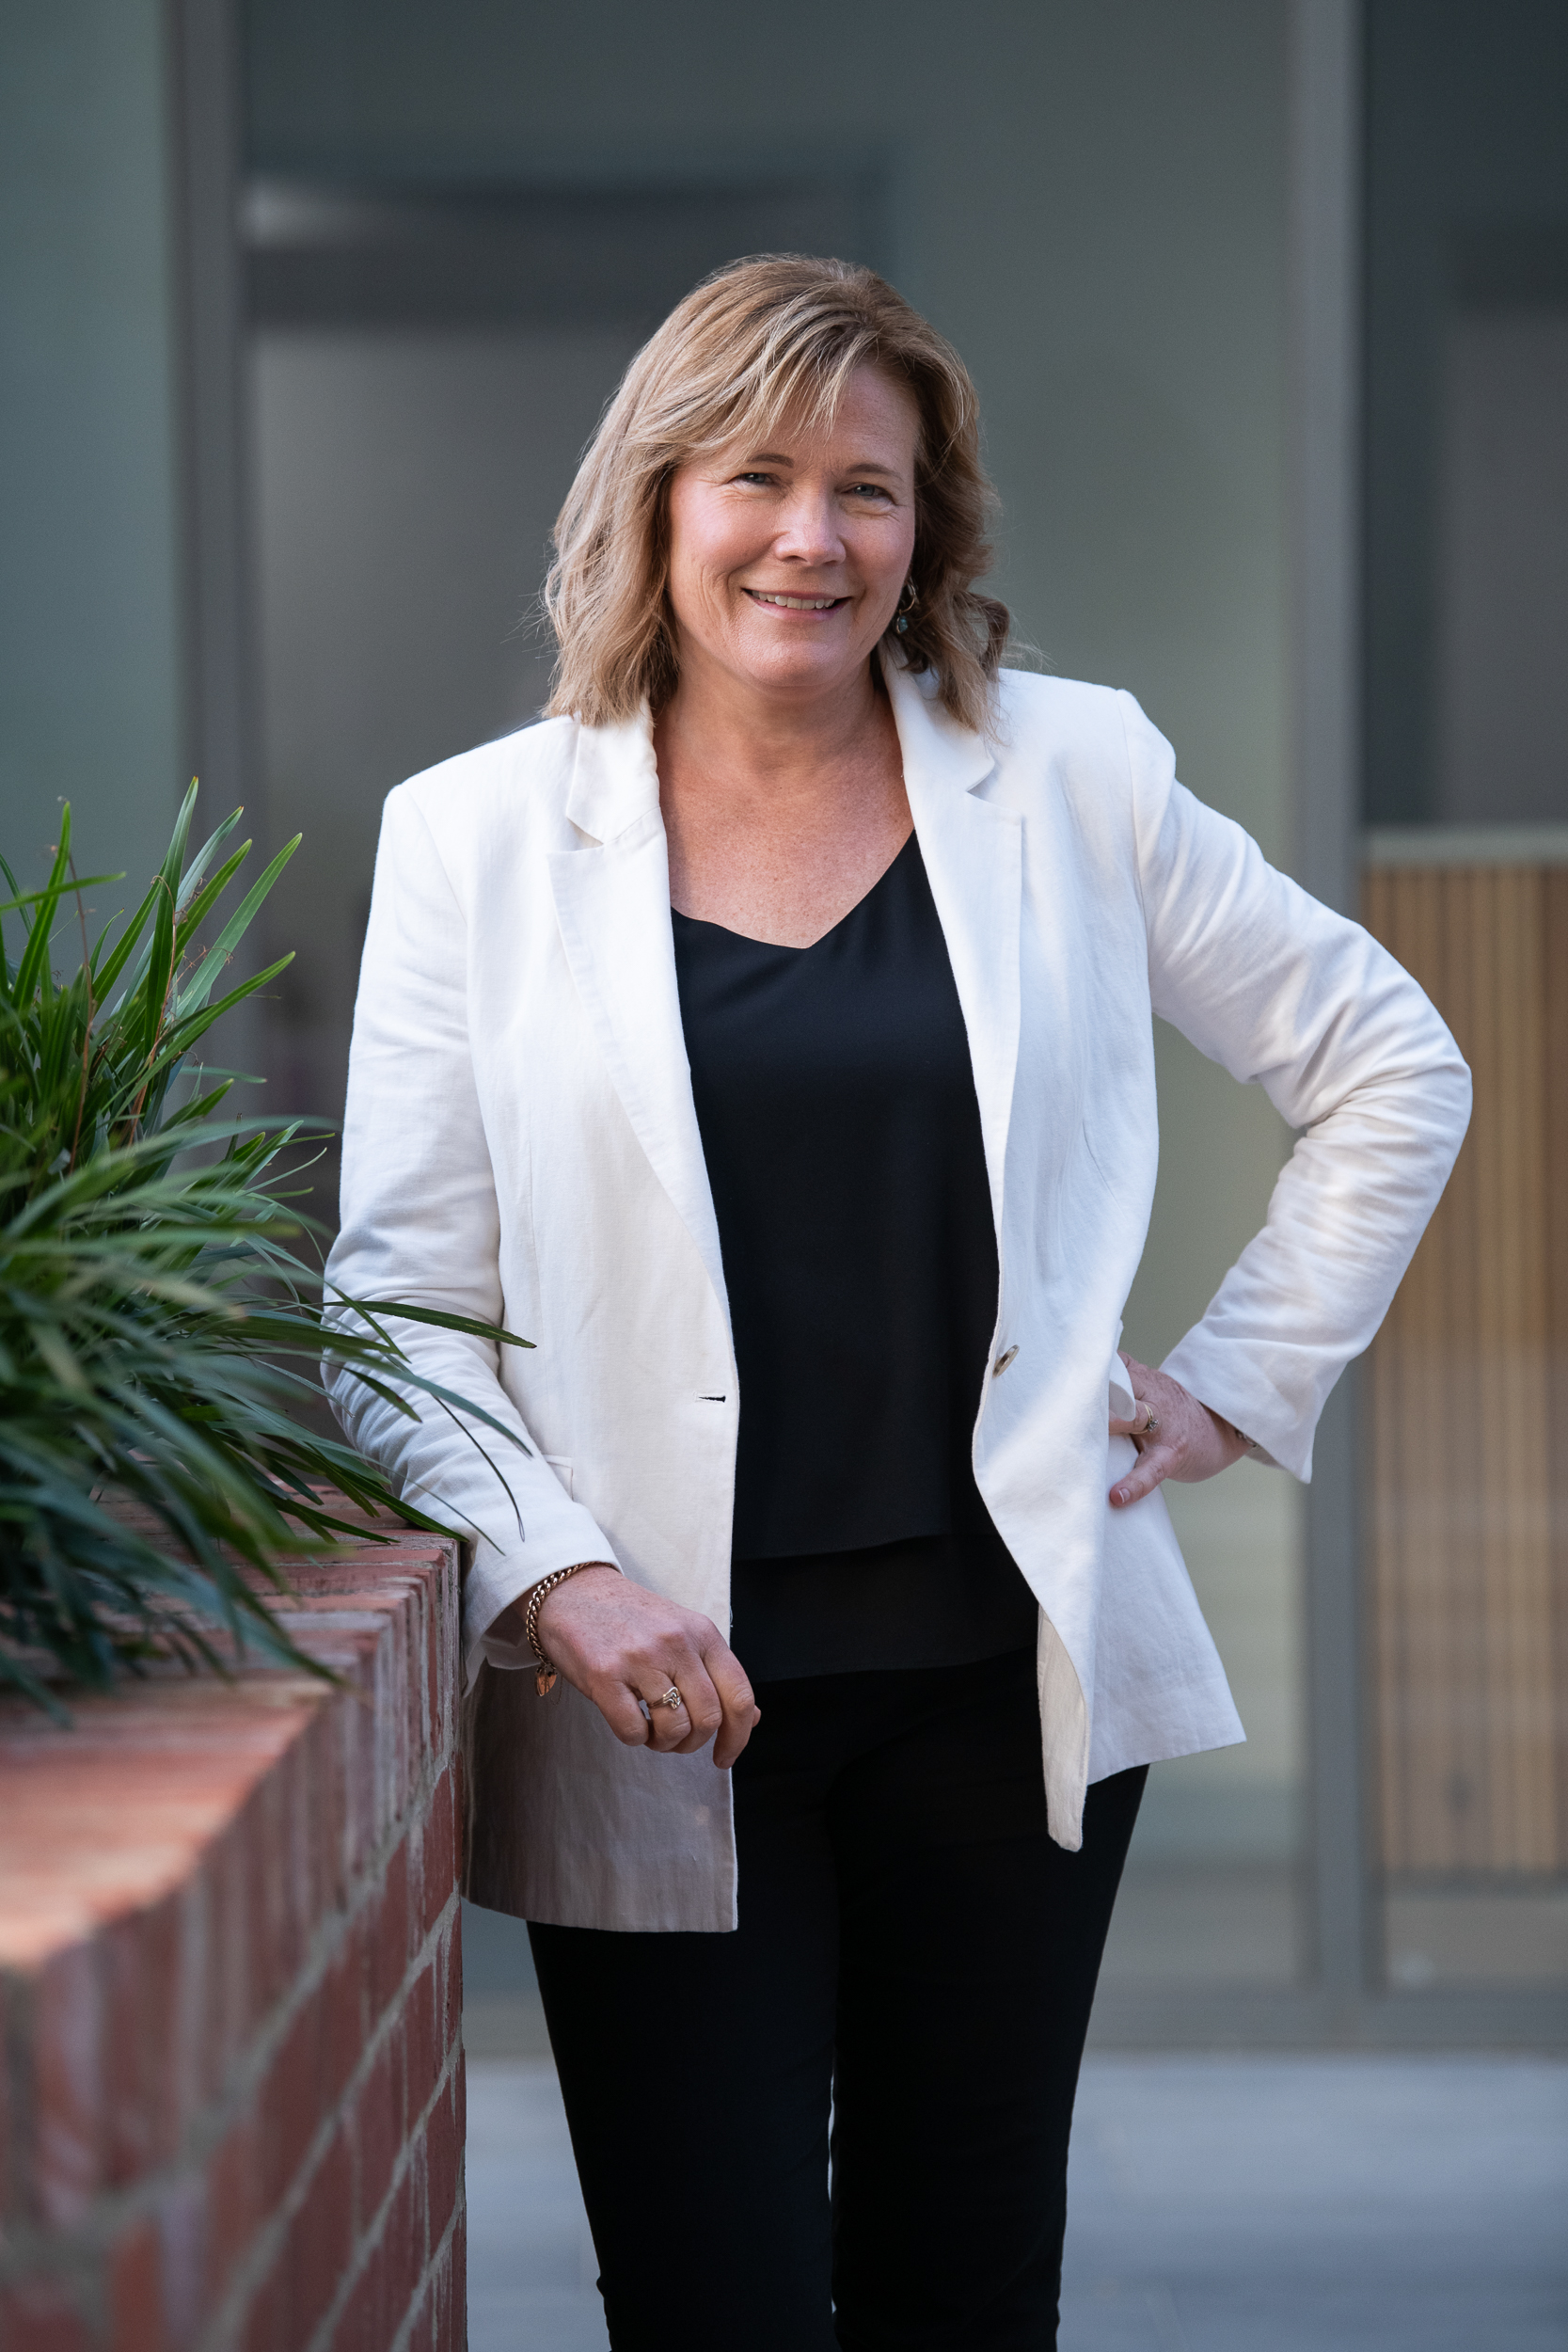 Personal branding portrait of Melbourne woman wearing white linen blazer, standing confidently with a smile.